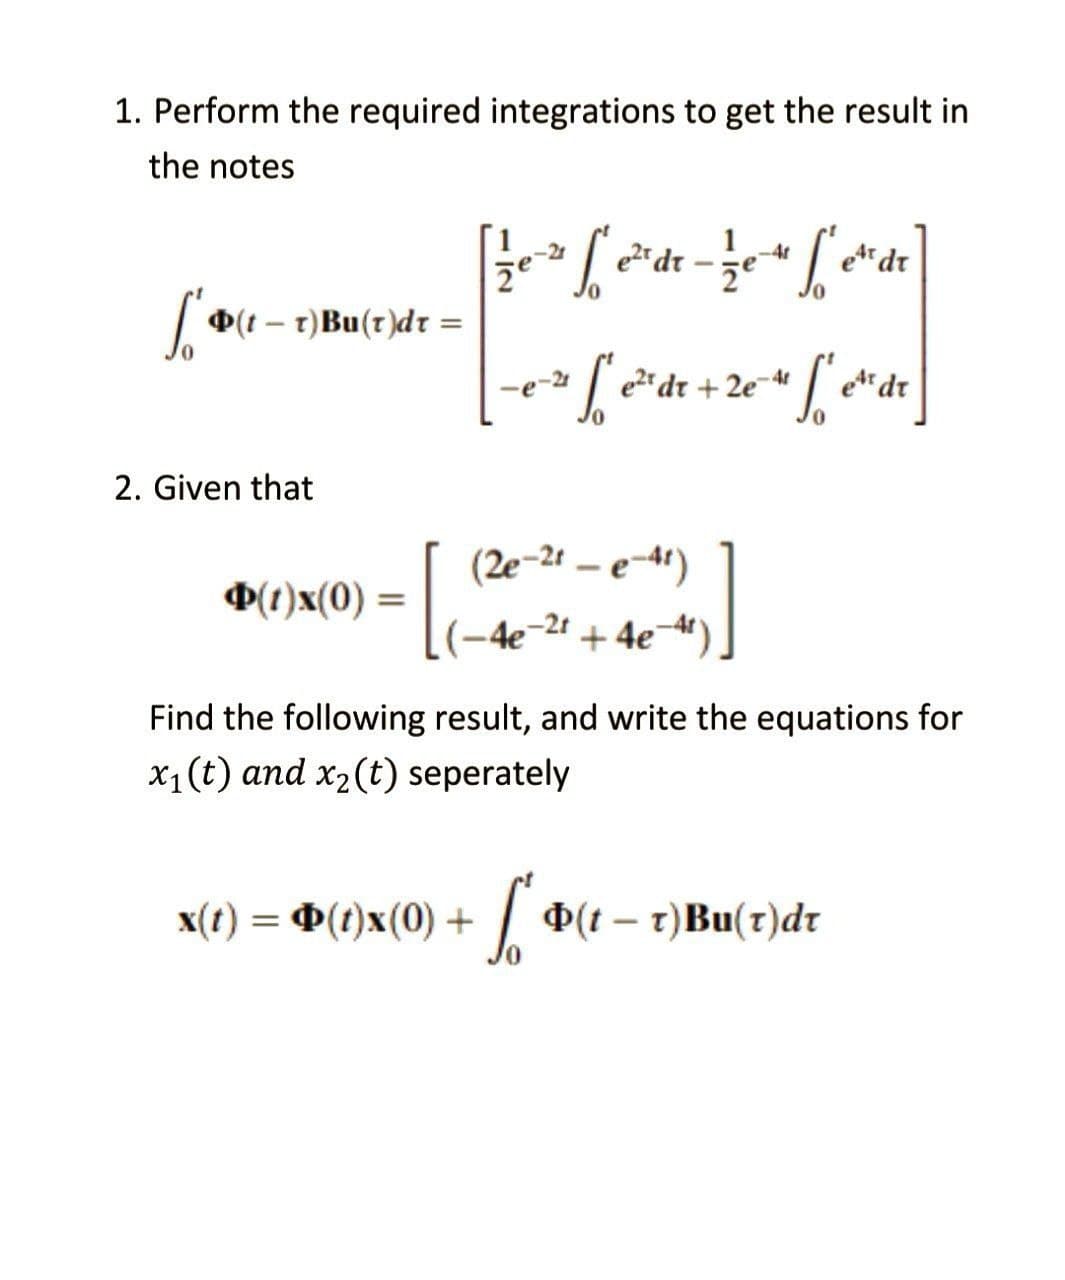 1. Perform the required integrations to get the result in
the notes
[1/7₁-²1 [²₁
[² e²^²dr - 12e-4 f²e²
et dr
že
["(t = T) Bu(t)dt =
-
-0²
[² e ²² dr +2e=41
2e-4 f et dr
2. Given that
(2e-2t-e-4t)
(1)x(0) =
-4e-2t + 4e¯
Find the following result, and write the equations for
x₁ (t) and x₂ (t) seperately
x(t) = (t)x(0) +
So
(tr)Bu(r)dr